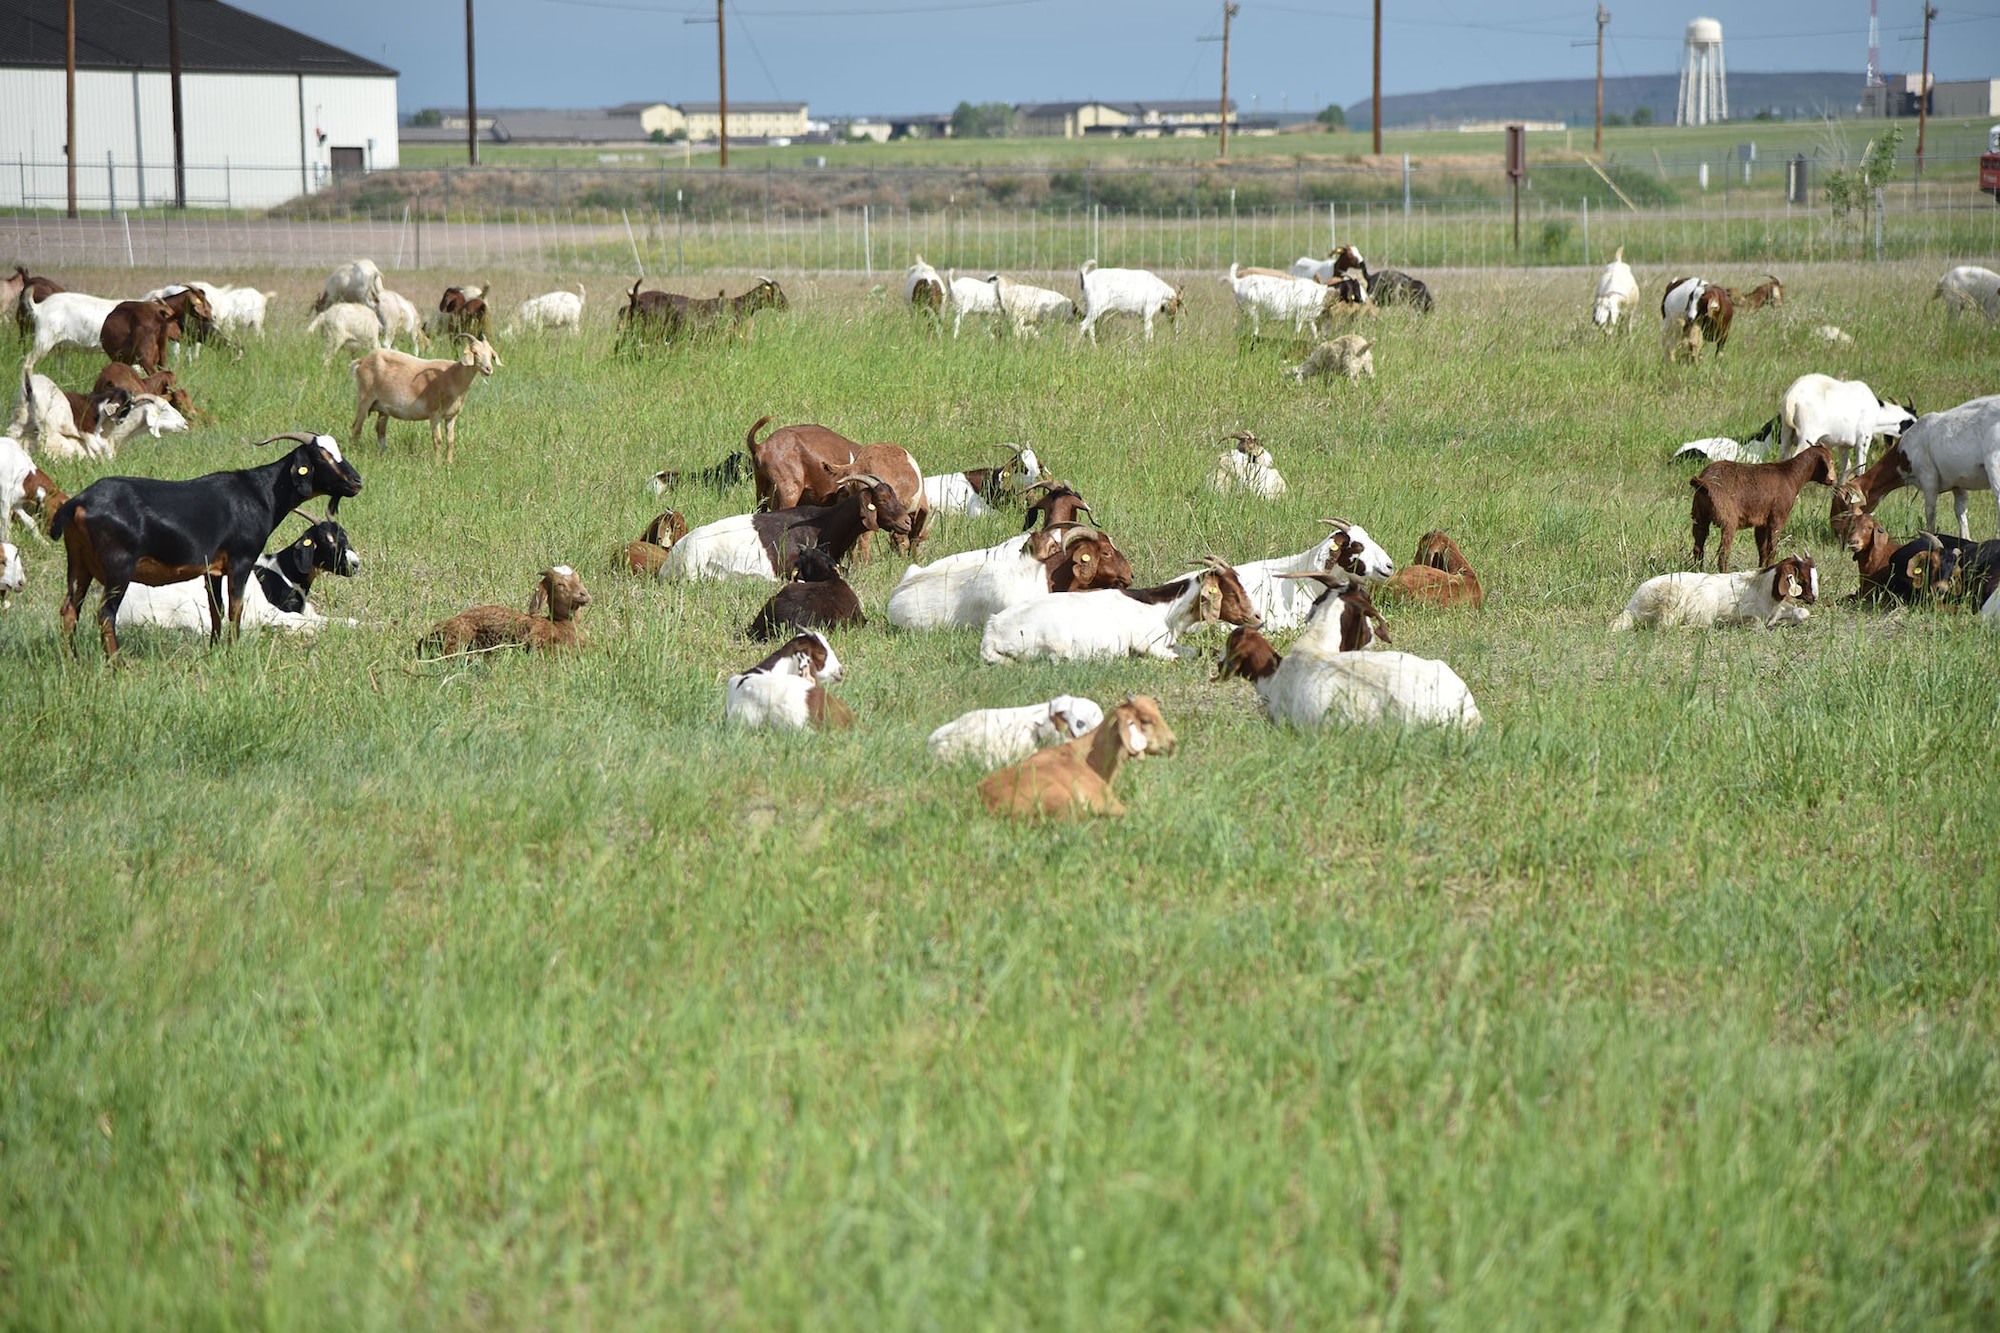 Goats roam a field, eating invasive weeds June 18, 2019, at Malmstrom Air Force Base, Mont.